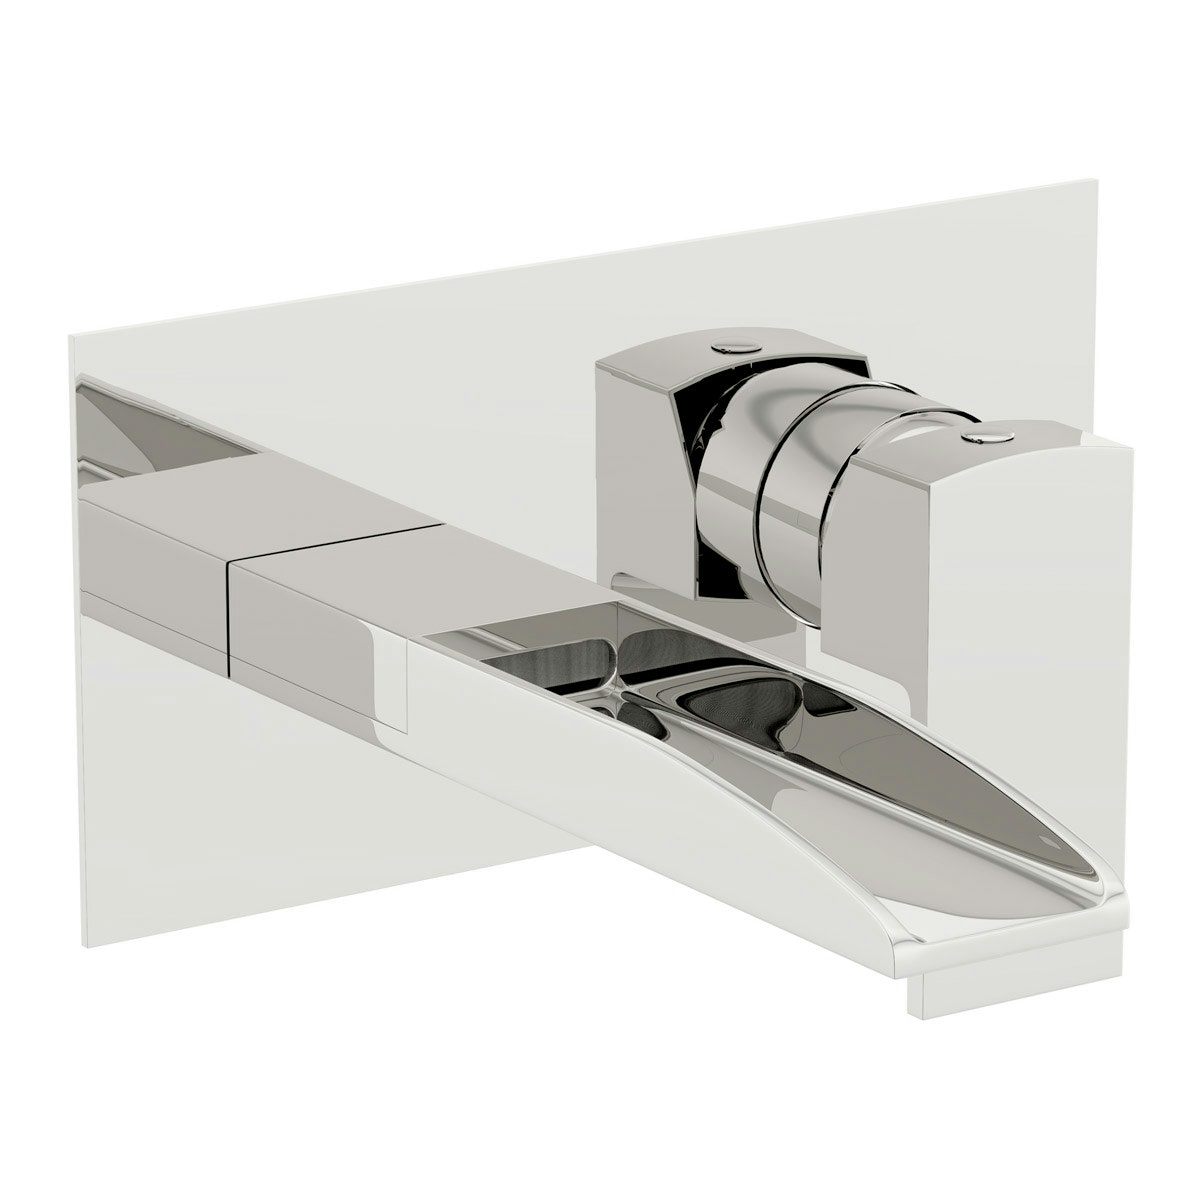 Mode Cooper waterfall wall mounted waterfall basin mixer tap with unslotted waste